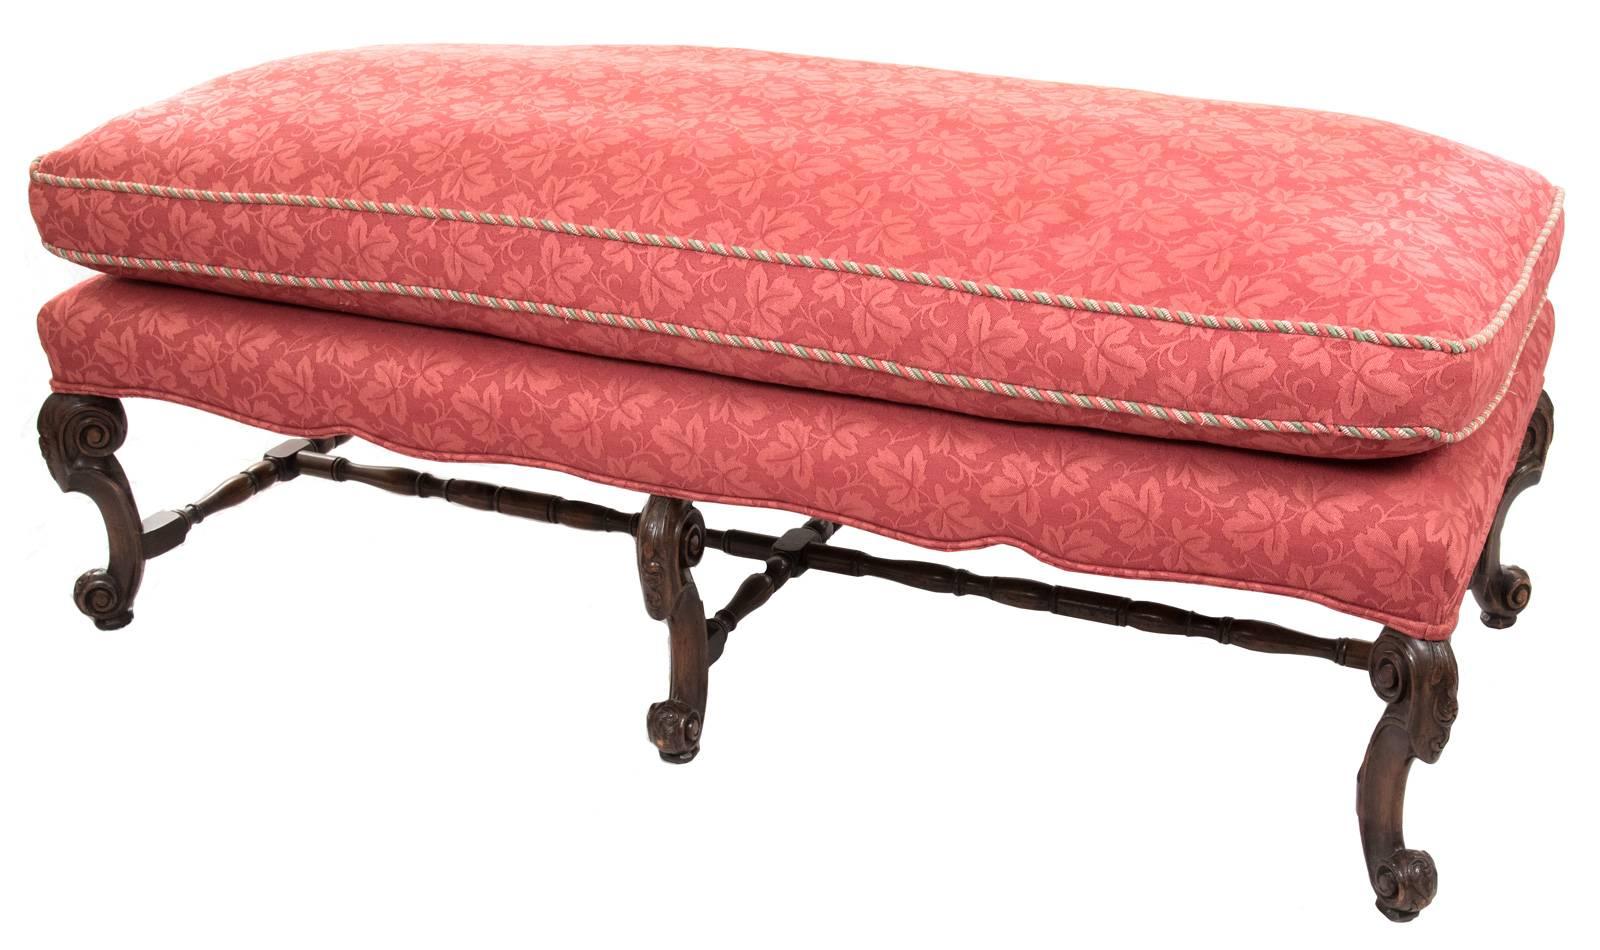 A large 18th century carved walnut bench with an overstuffed, removable cushion.